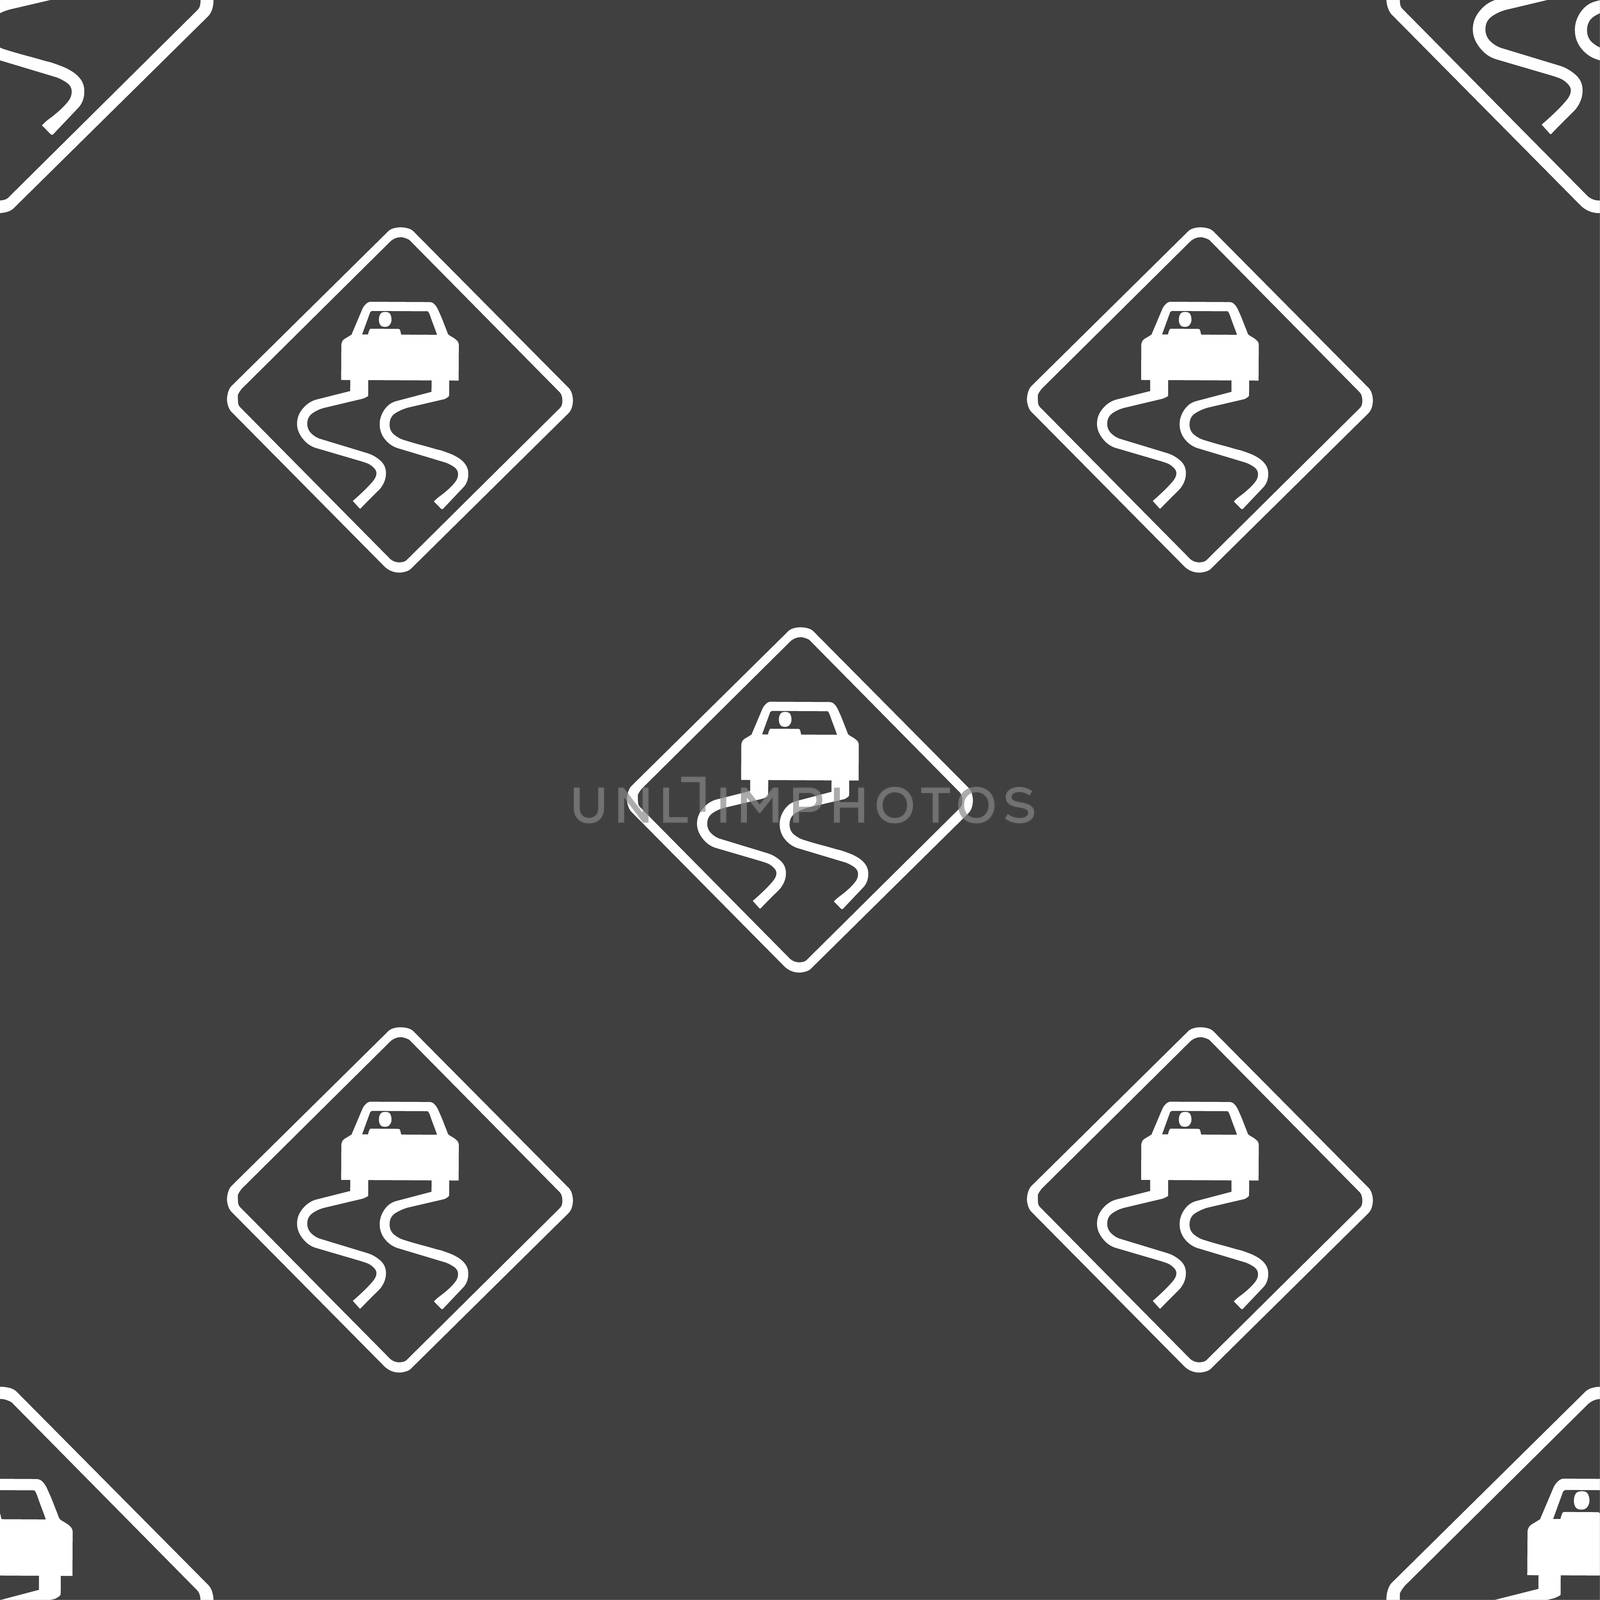 Road slippery icon sign. Seamless pattern on a gray background. illustration